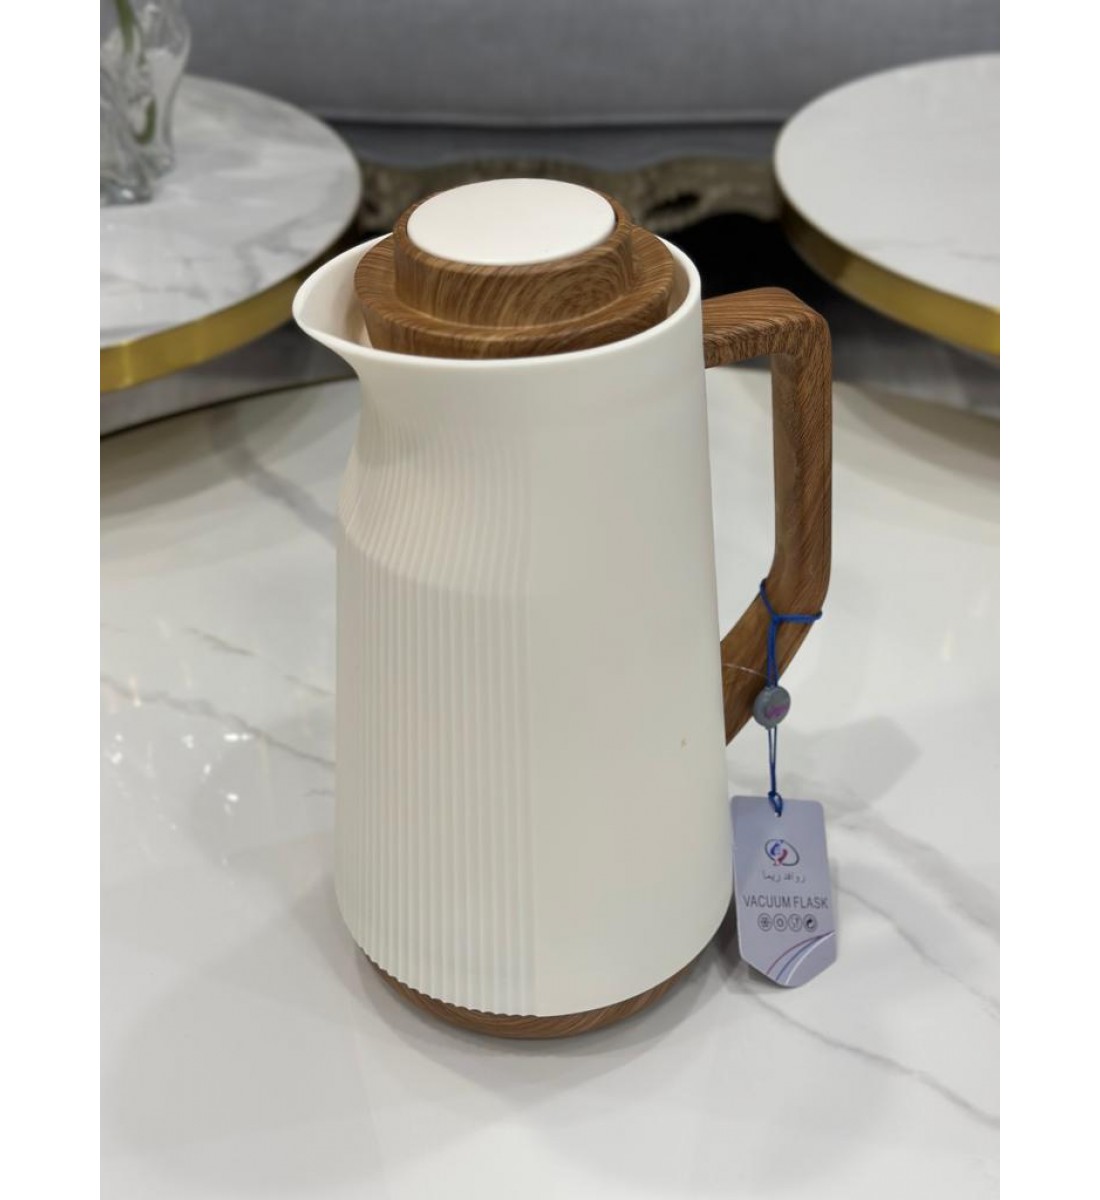  Solia Wooden Sugar Thermos 1 Liter With Elegant Shape 